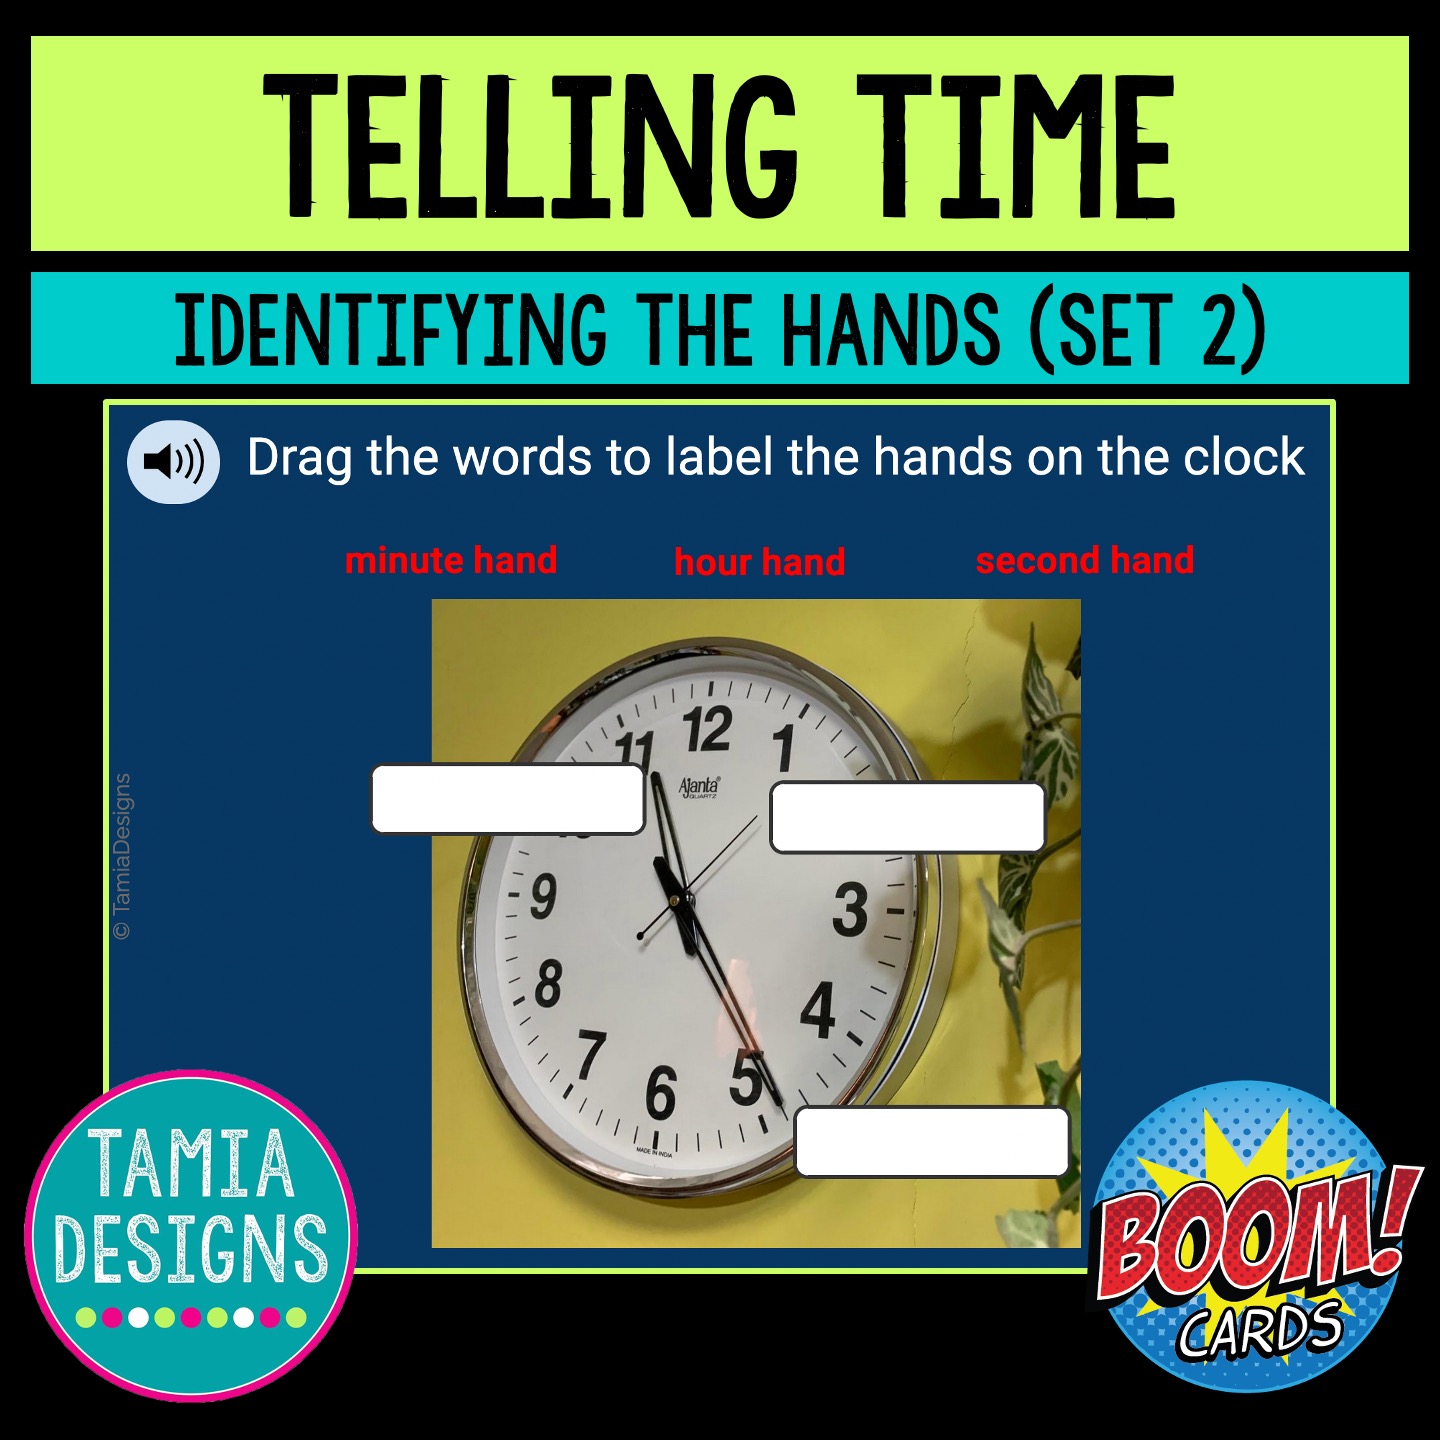 Telling time: identifying the hands on a clock (Set 2)'s featured image